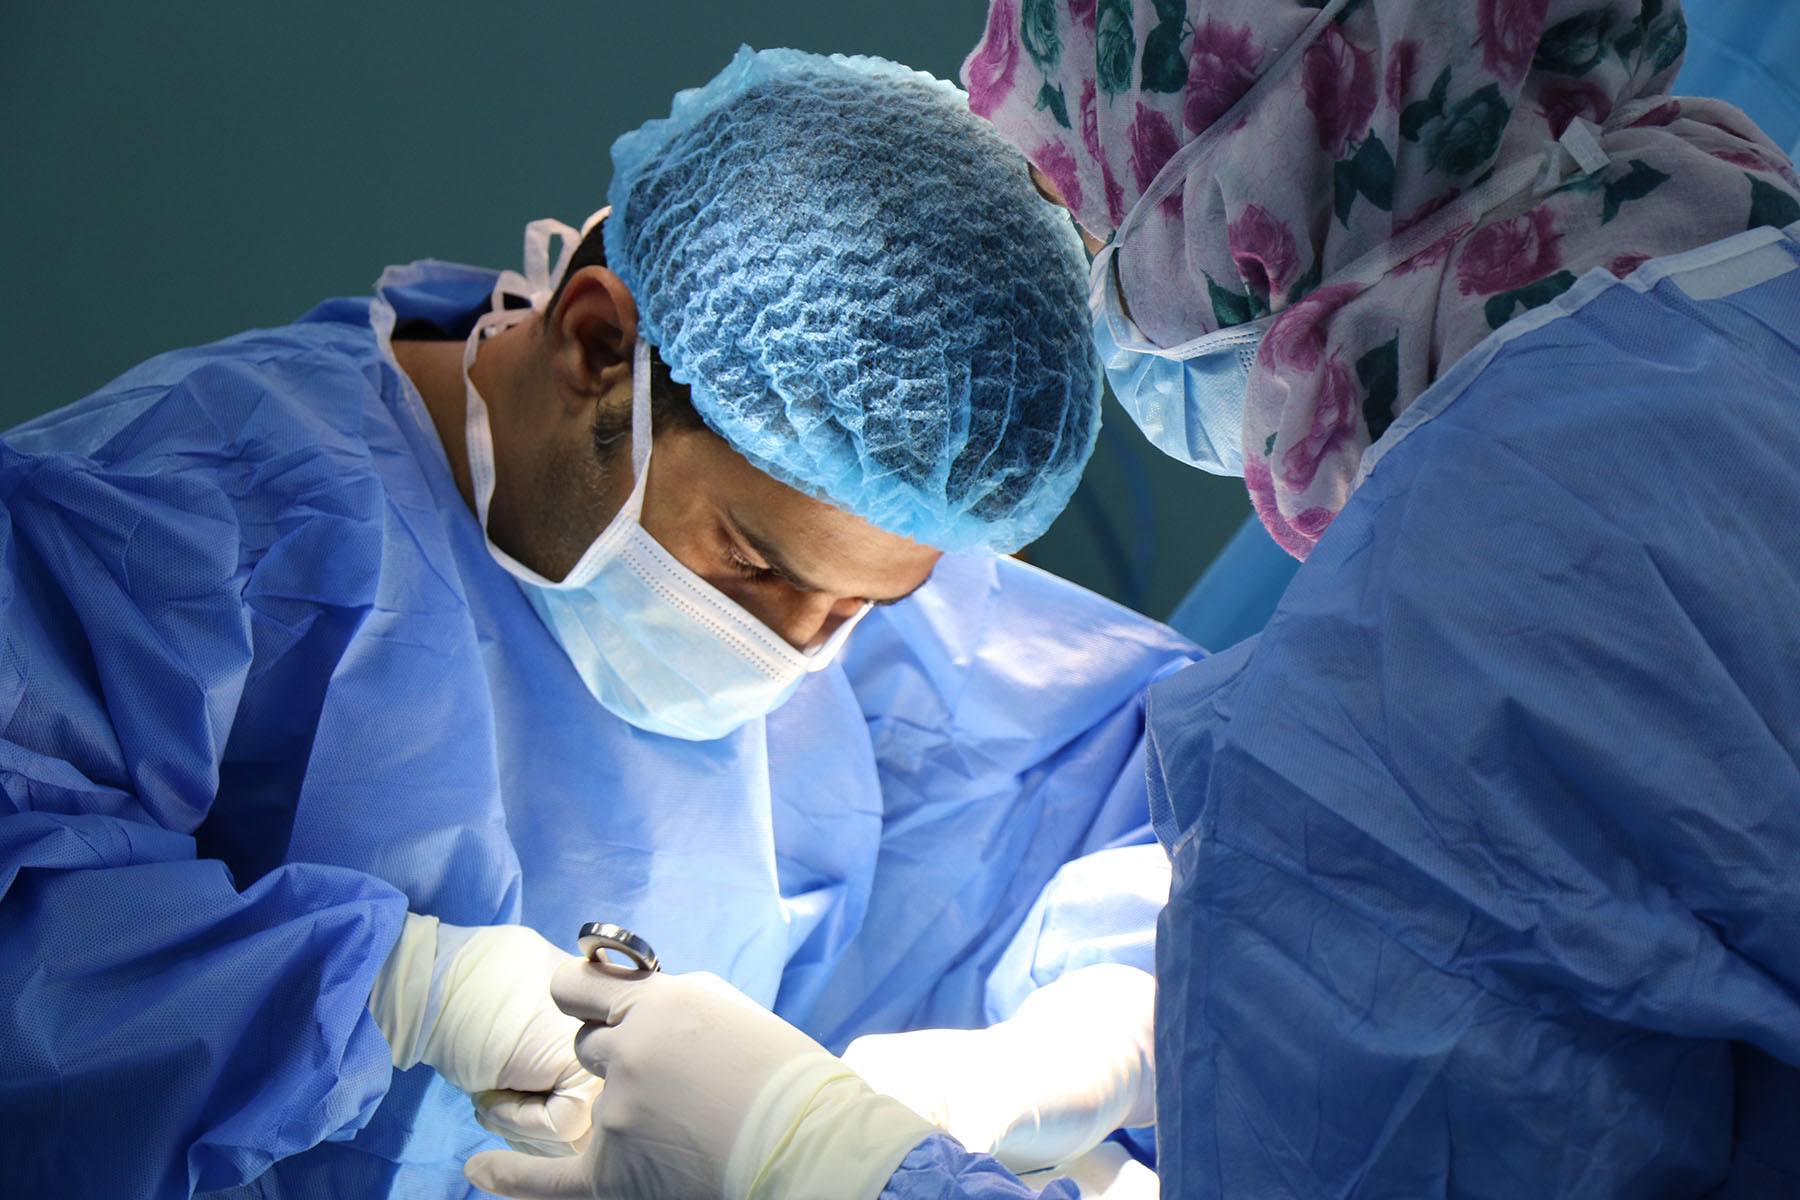 Preparing for surgery? What you need to know